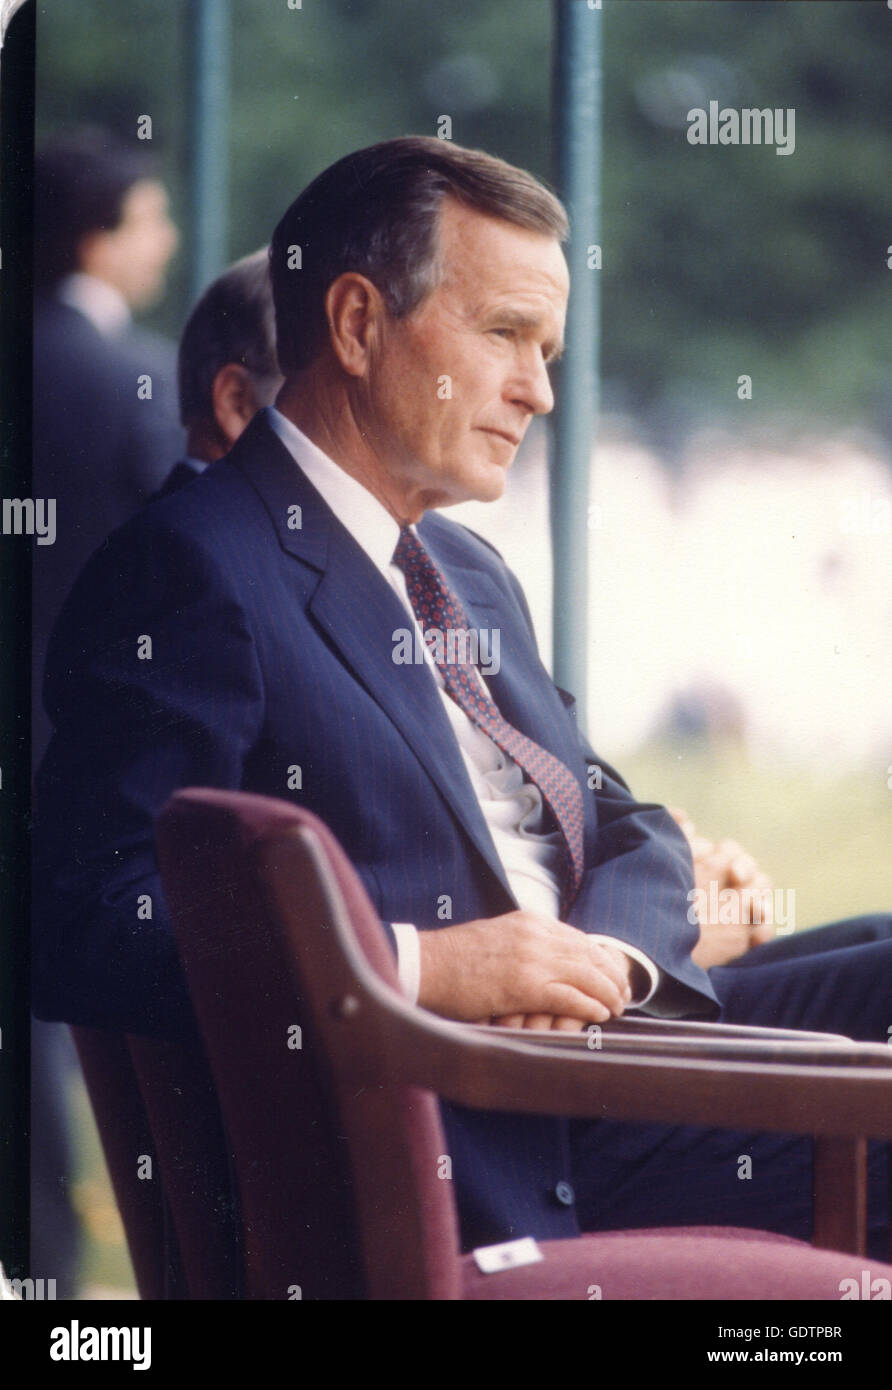 President George H.W. Bush at the Naval Academy, Annapolis, MD. Stock Photo